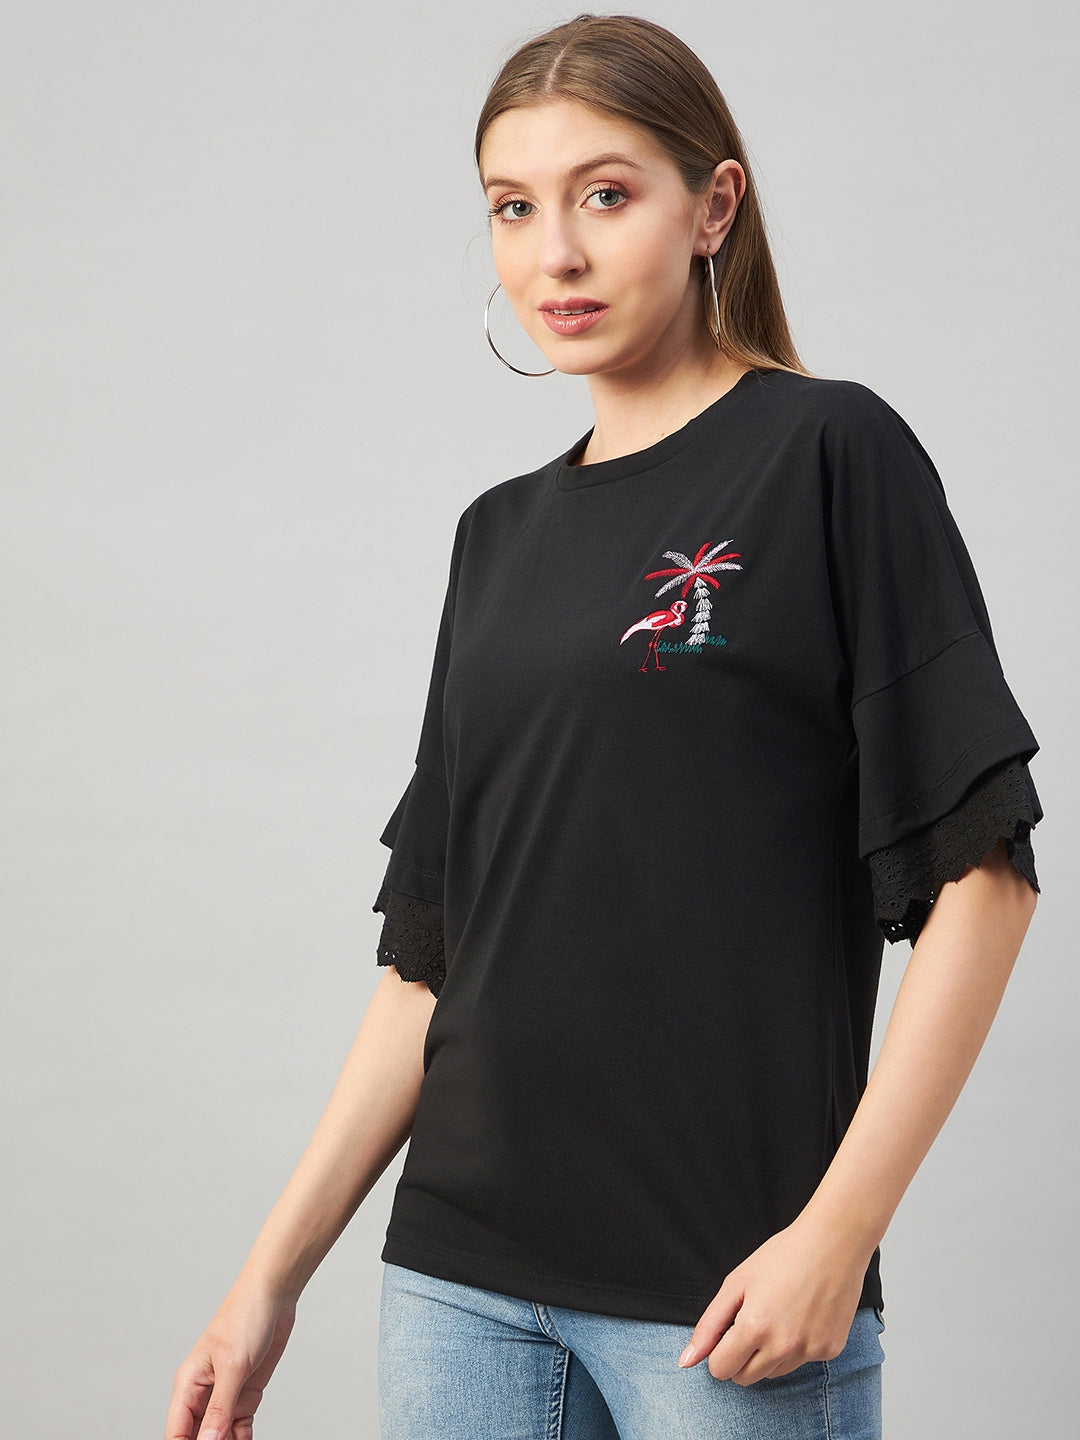 Austin Wood Women Embroidery Casual Top